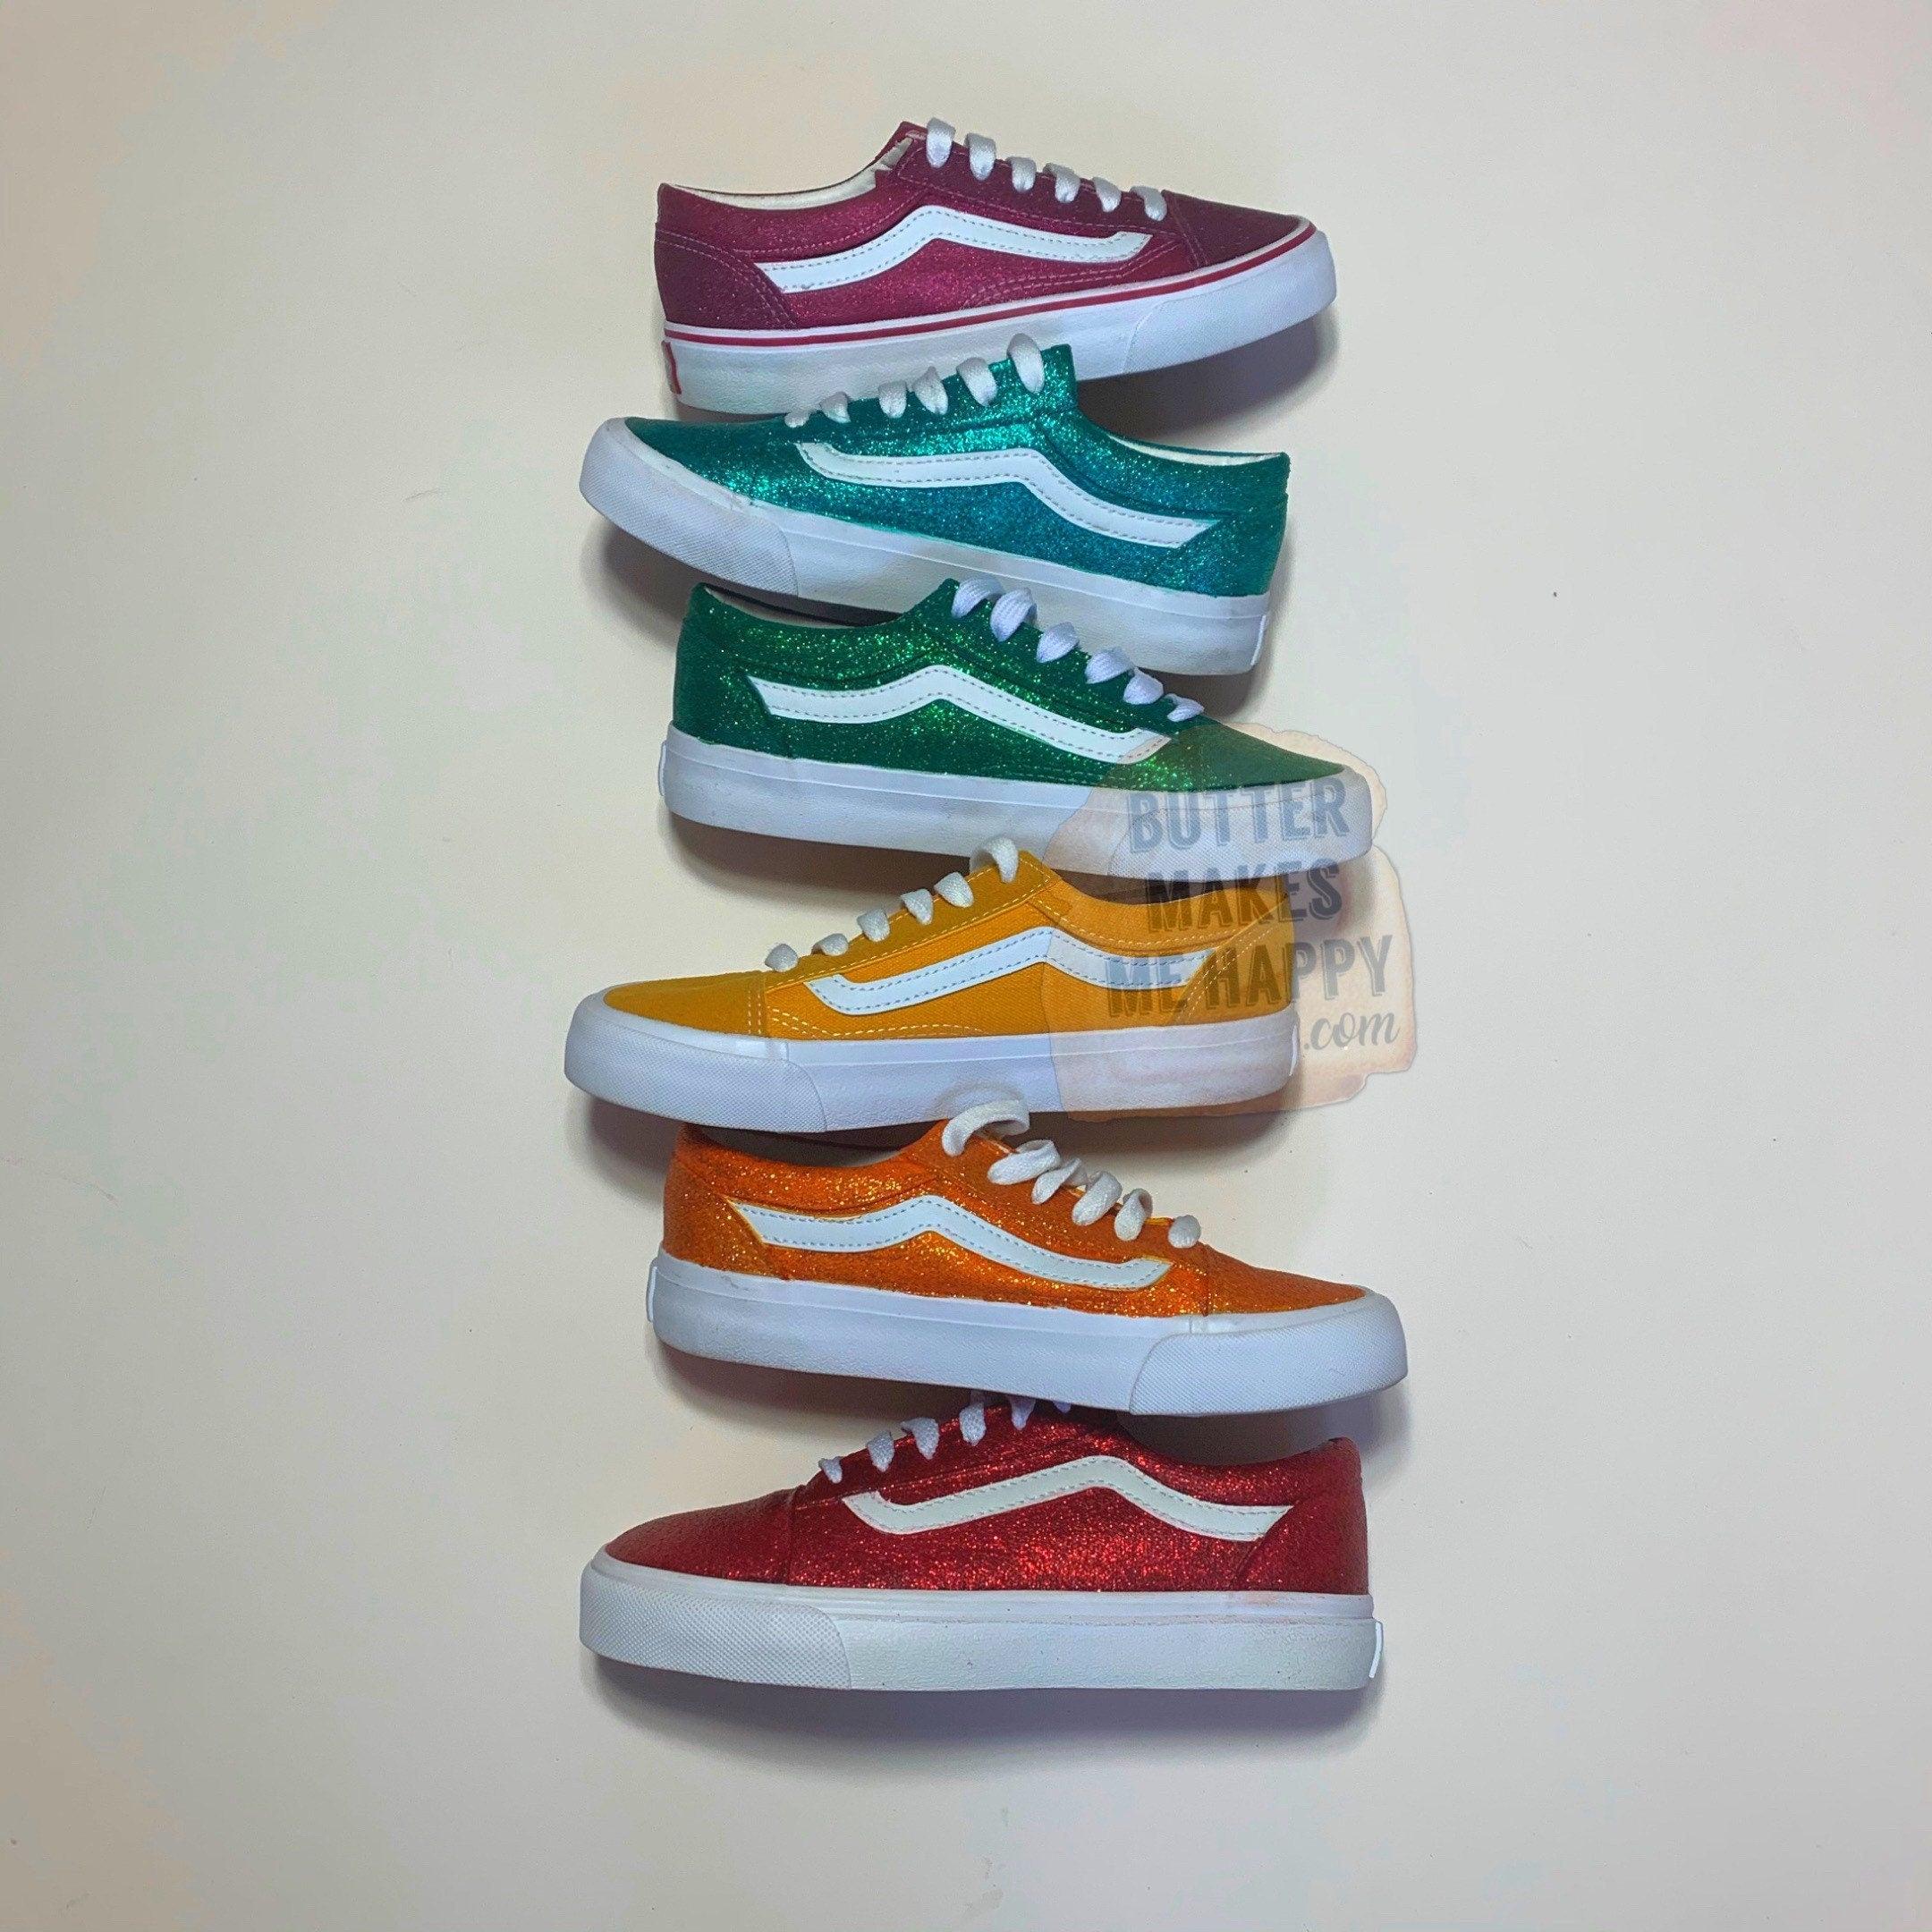 Pick Your Color - Sparkly Glitter Old Skool Vans – ButterMakesMeHappy